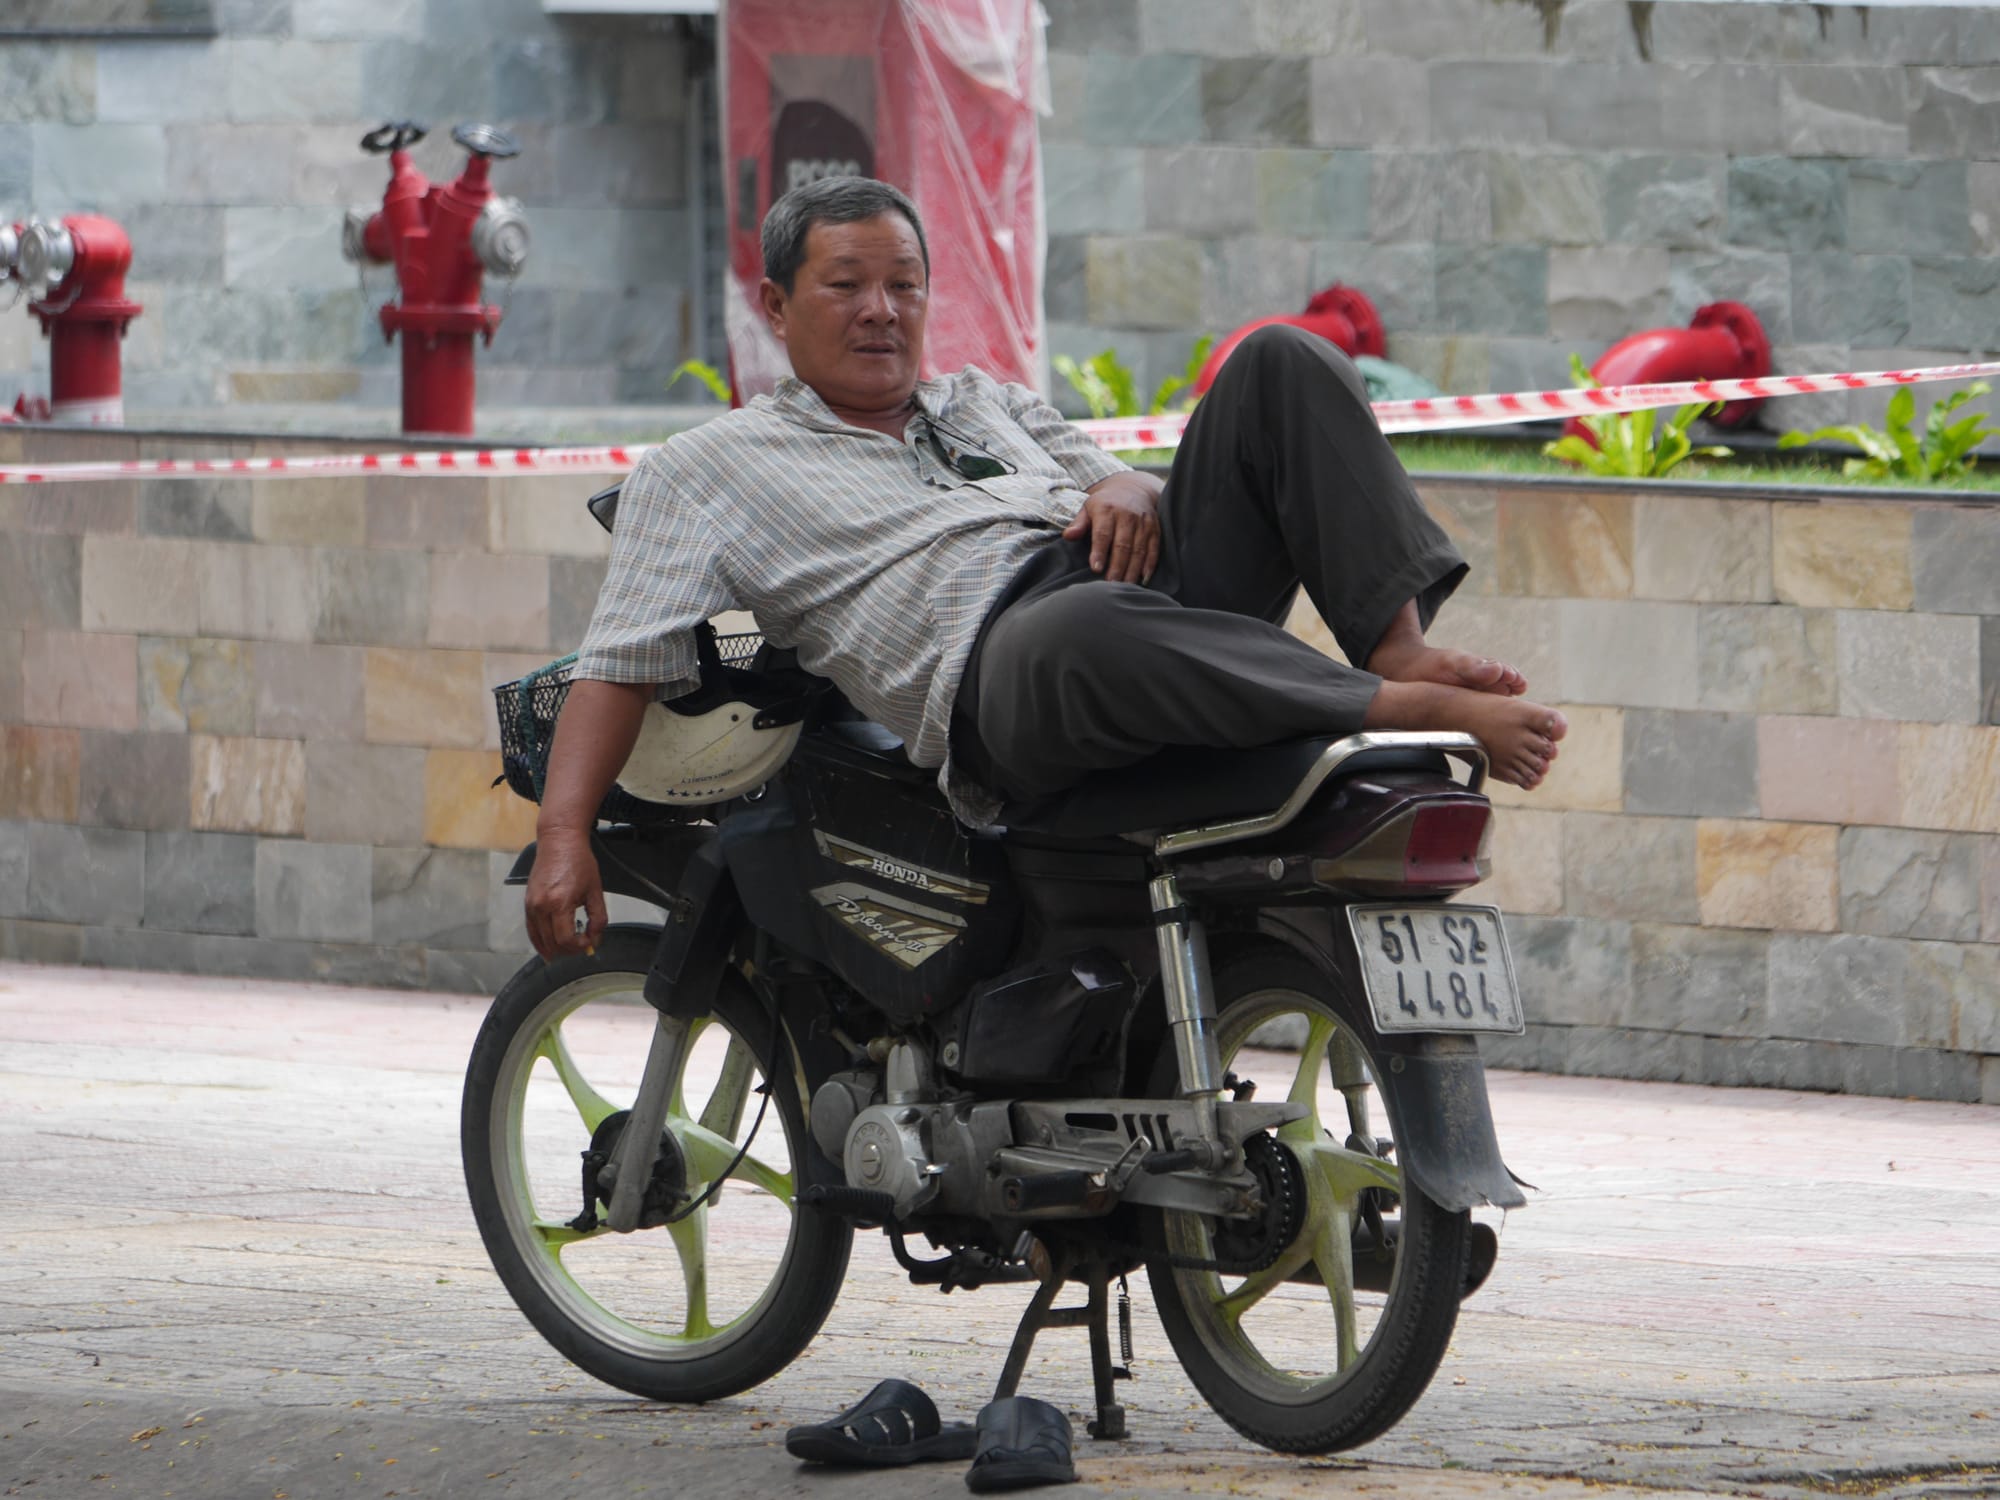 Photo by Author — relaxing on your bike — photos from around Ho Chi Minh City (Saigon), Vietnam